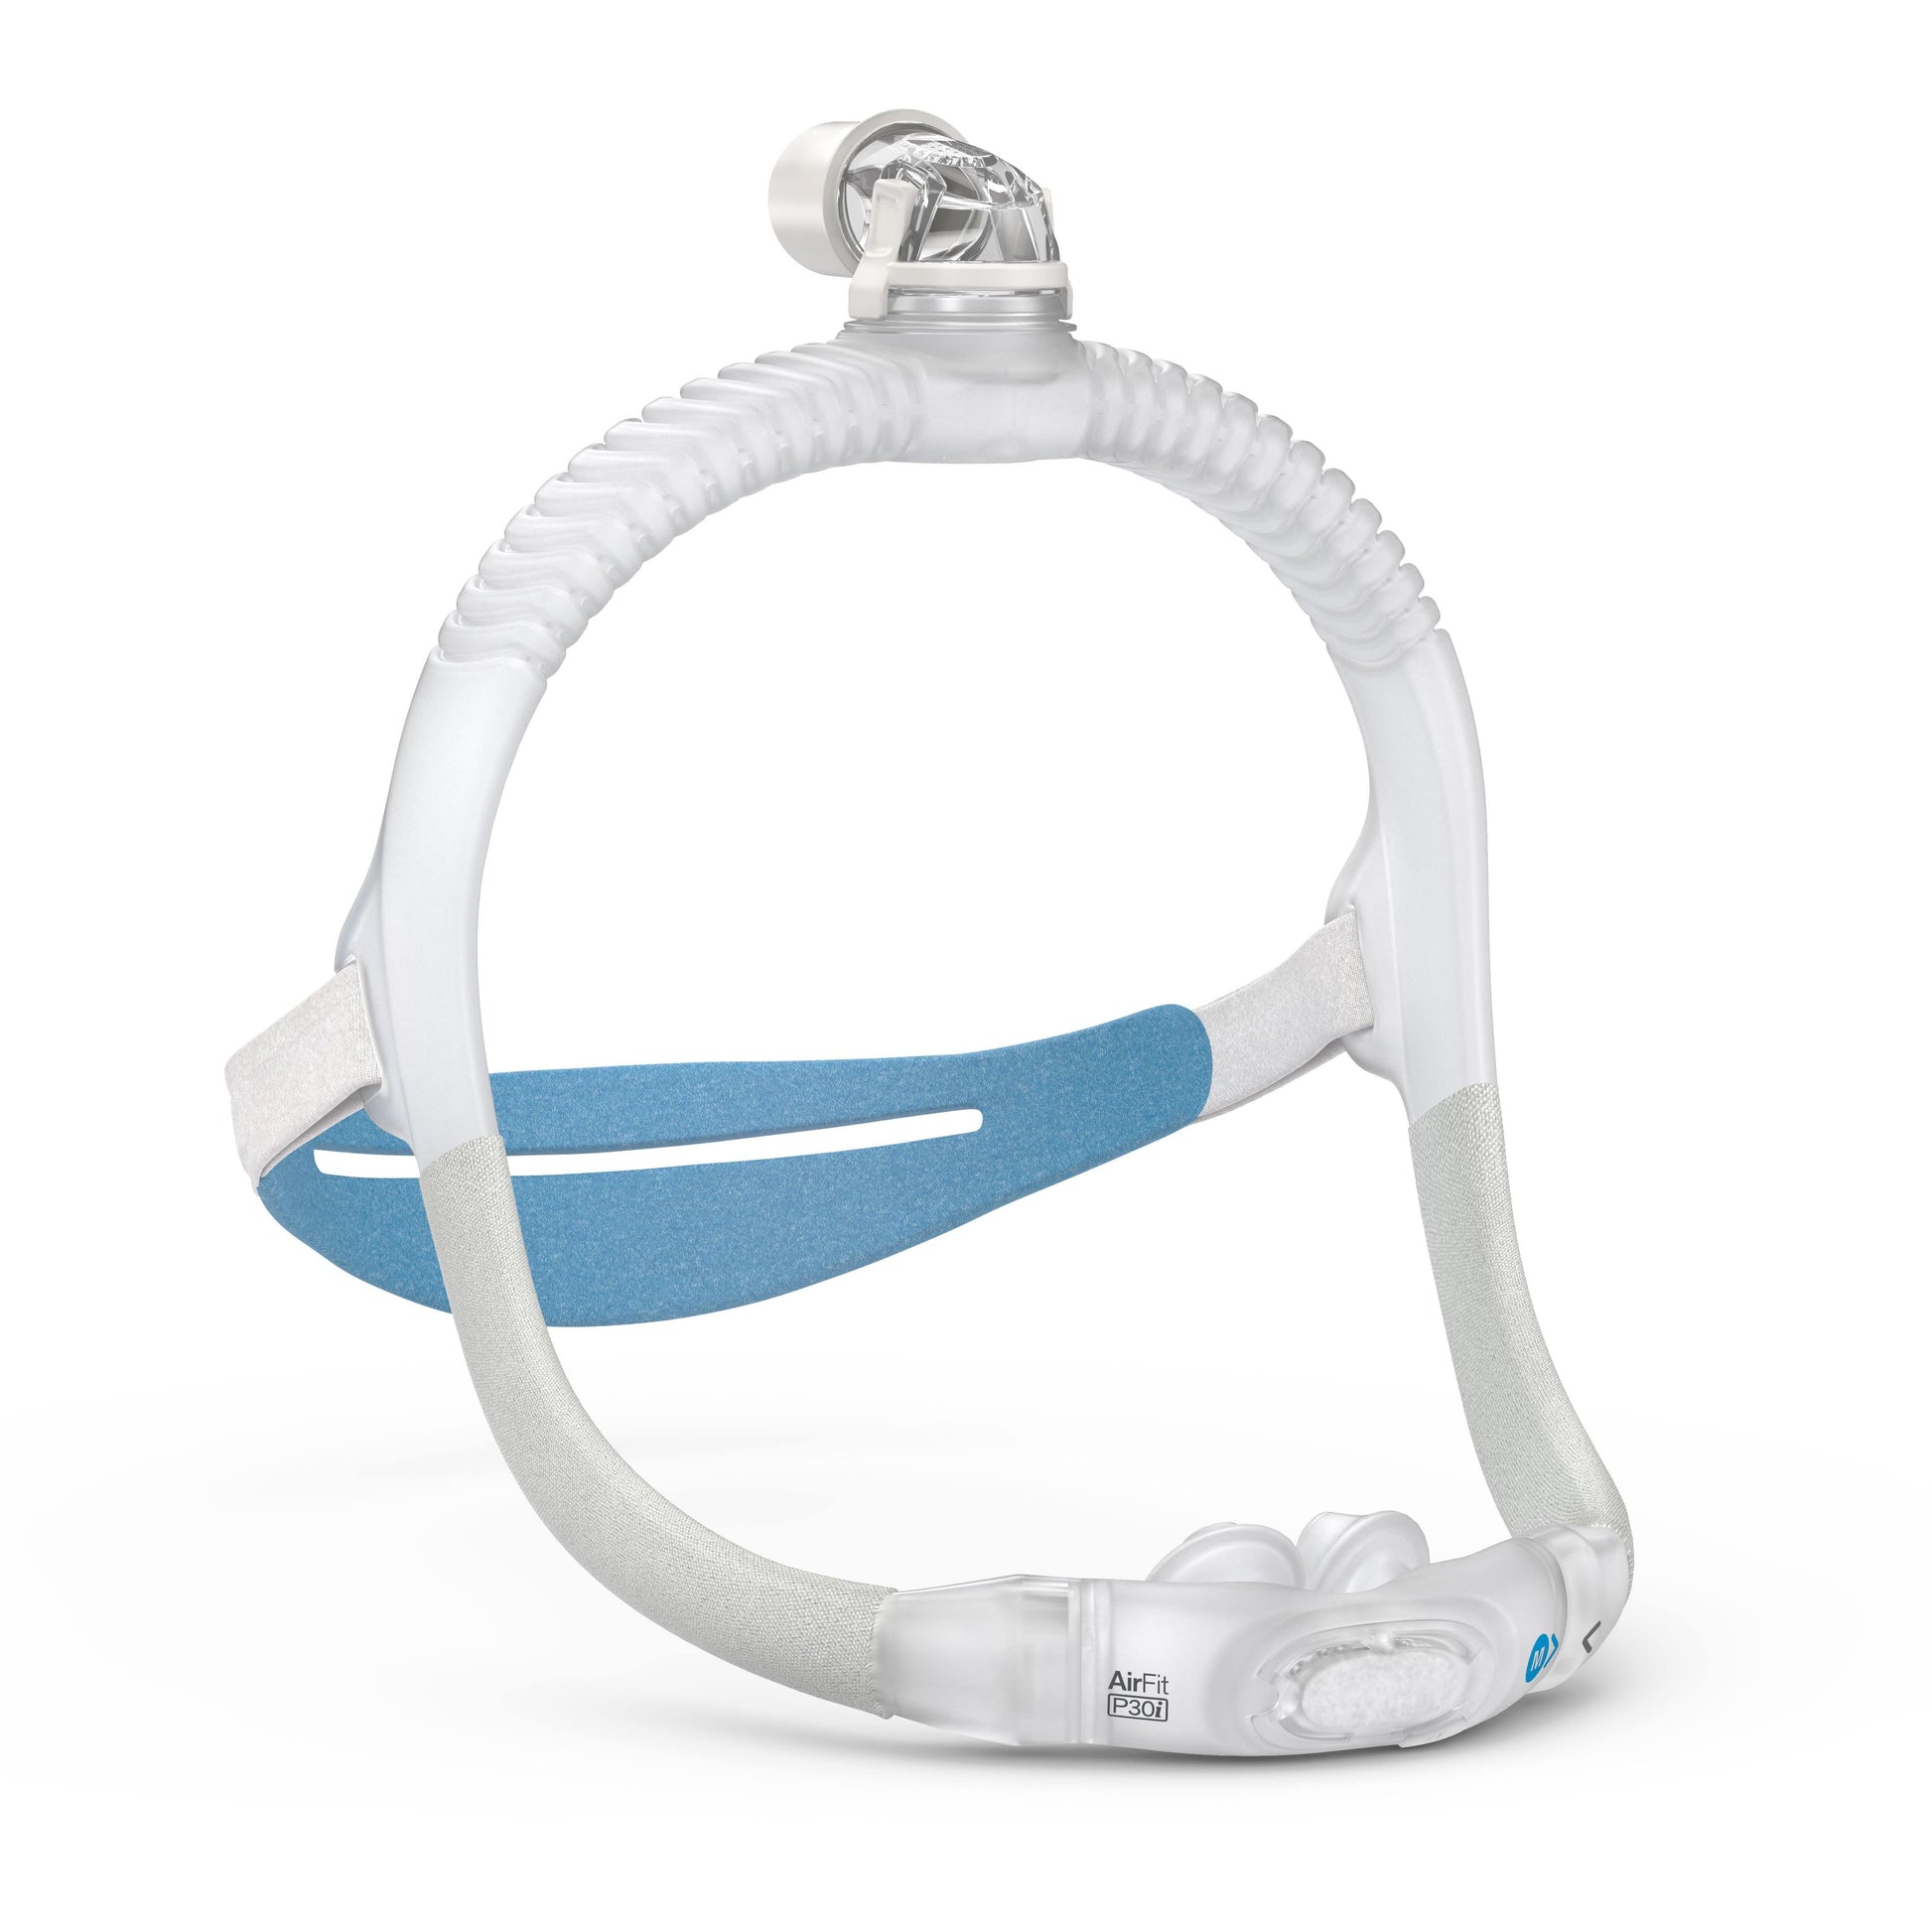 Resmed Airfit P30i nasal pillow CPAP mask 